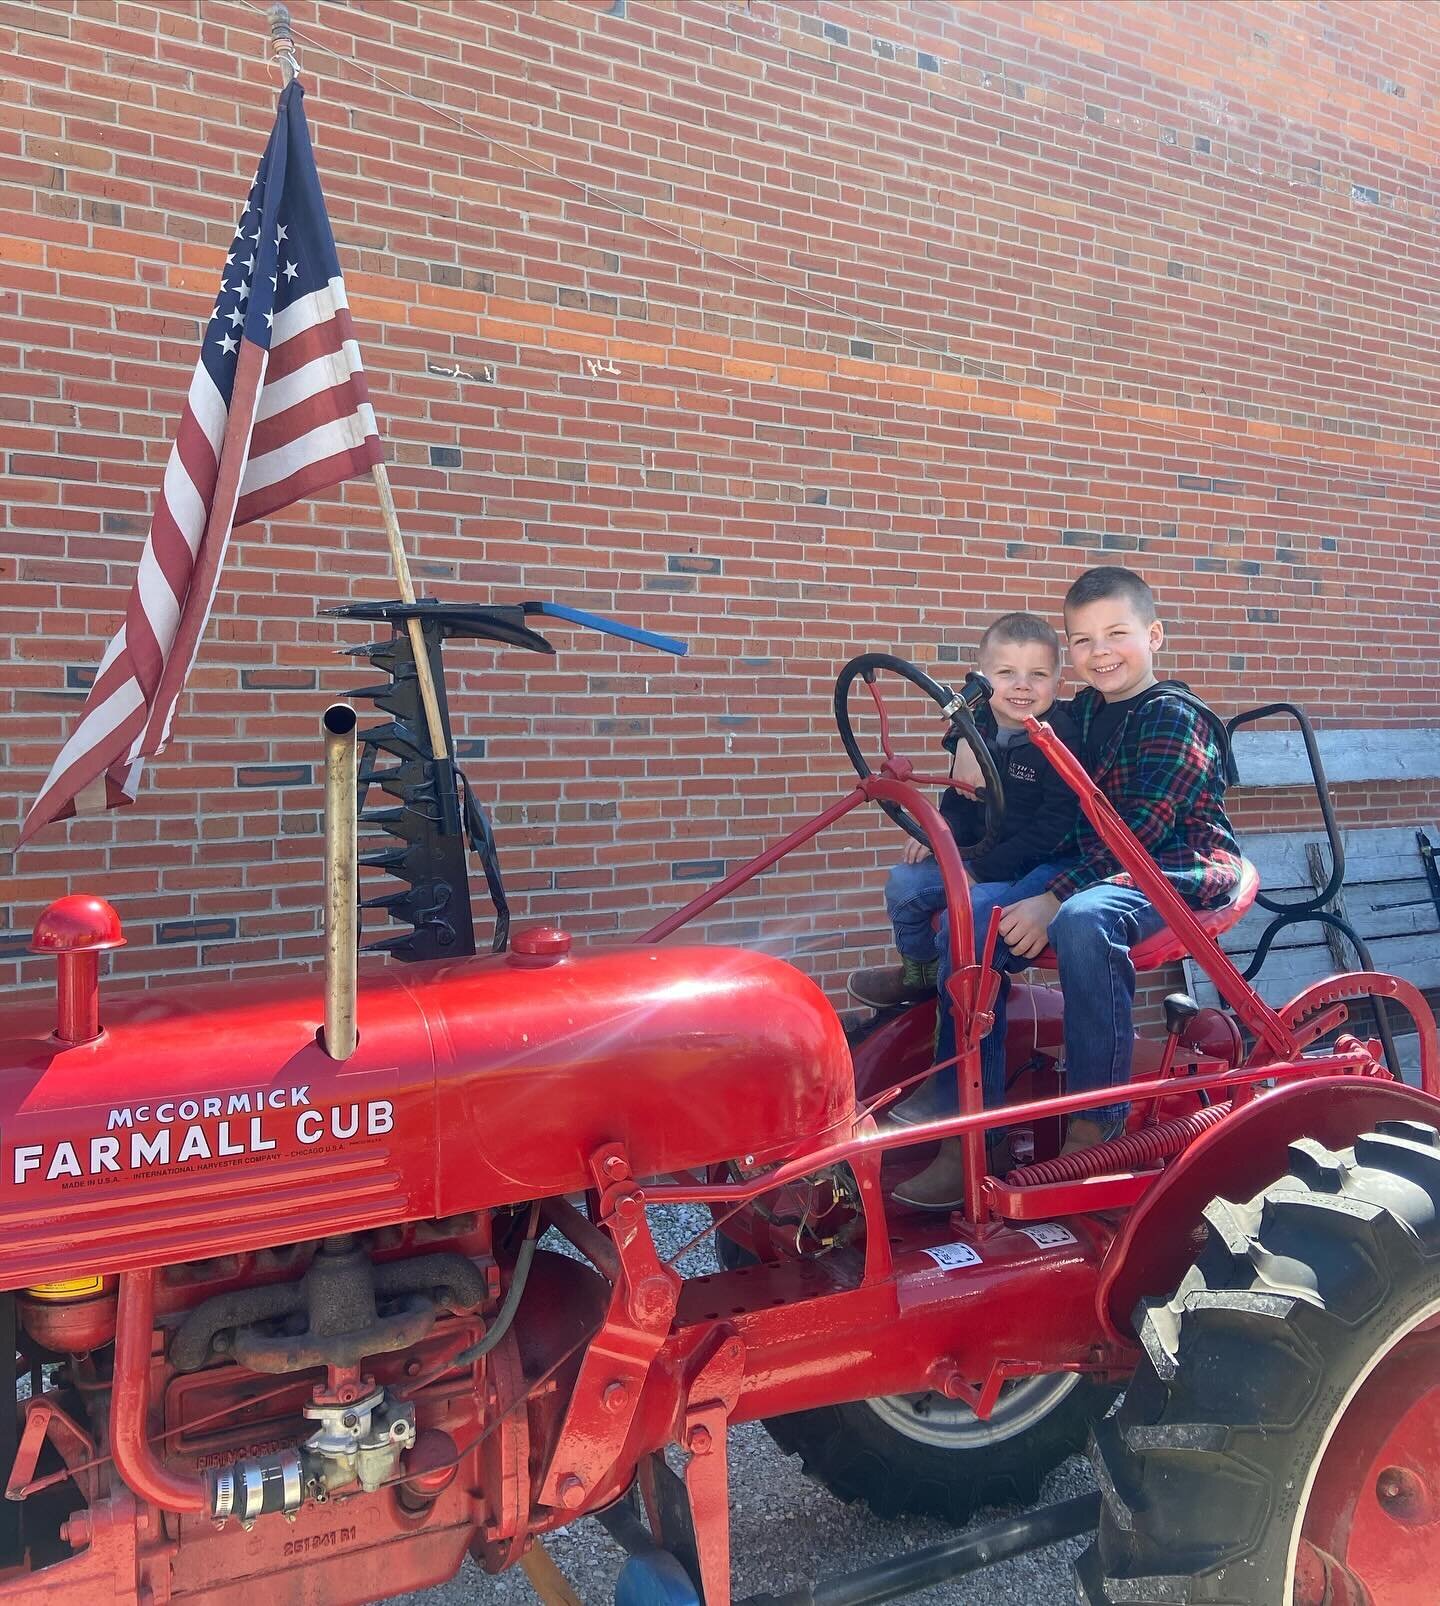 Tractor Show day at Faeths. Nothing more American than this pic!
.
.
.
#tractor #tractorlife #thisisiowa #iowa #findyourfortmadison